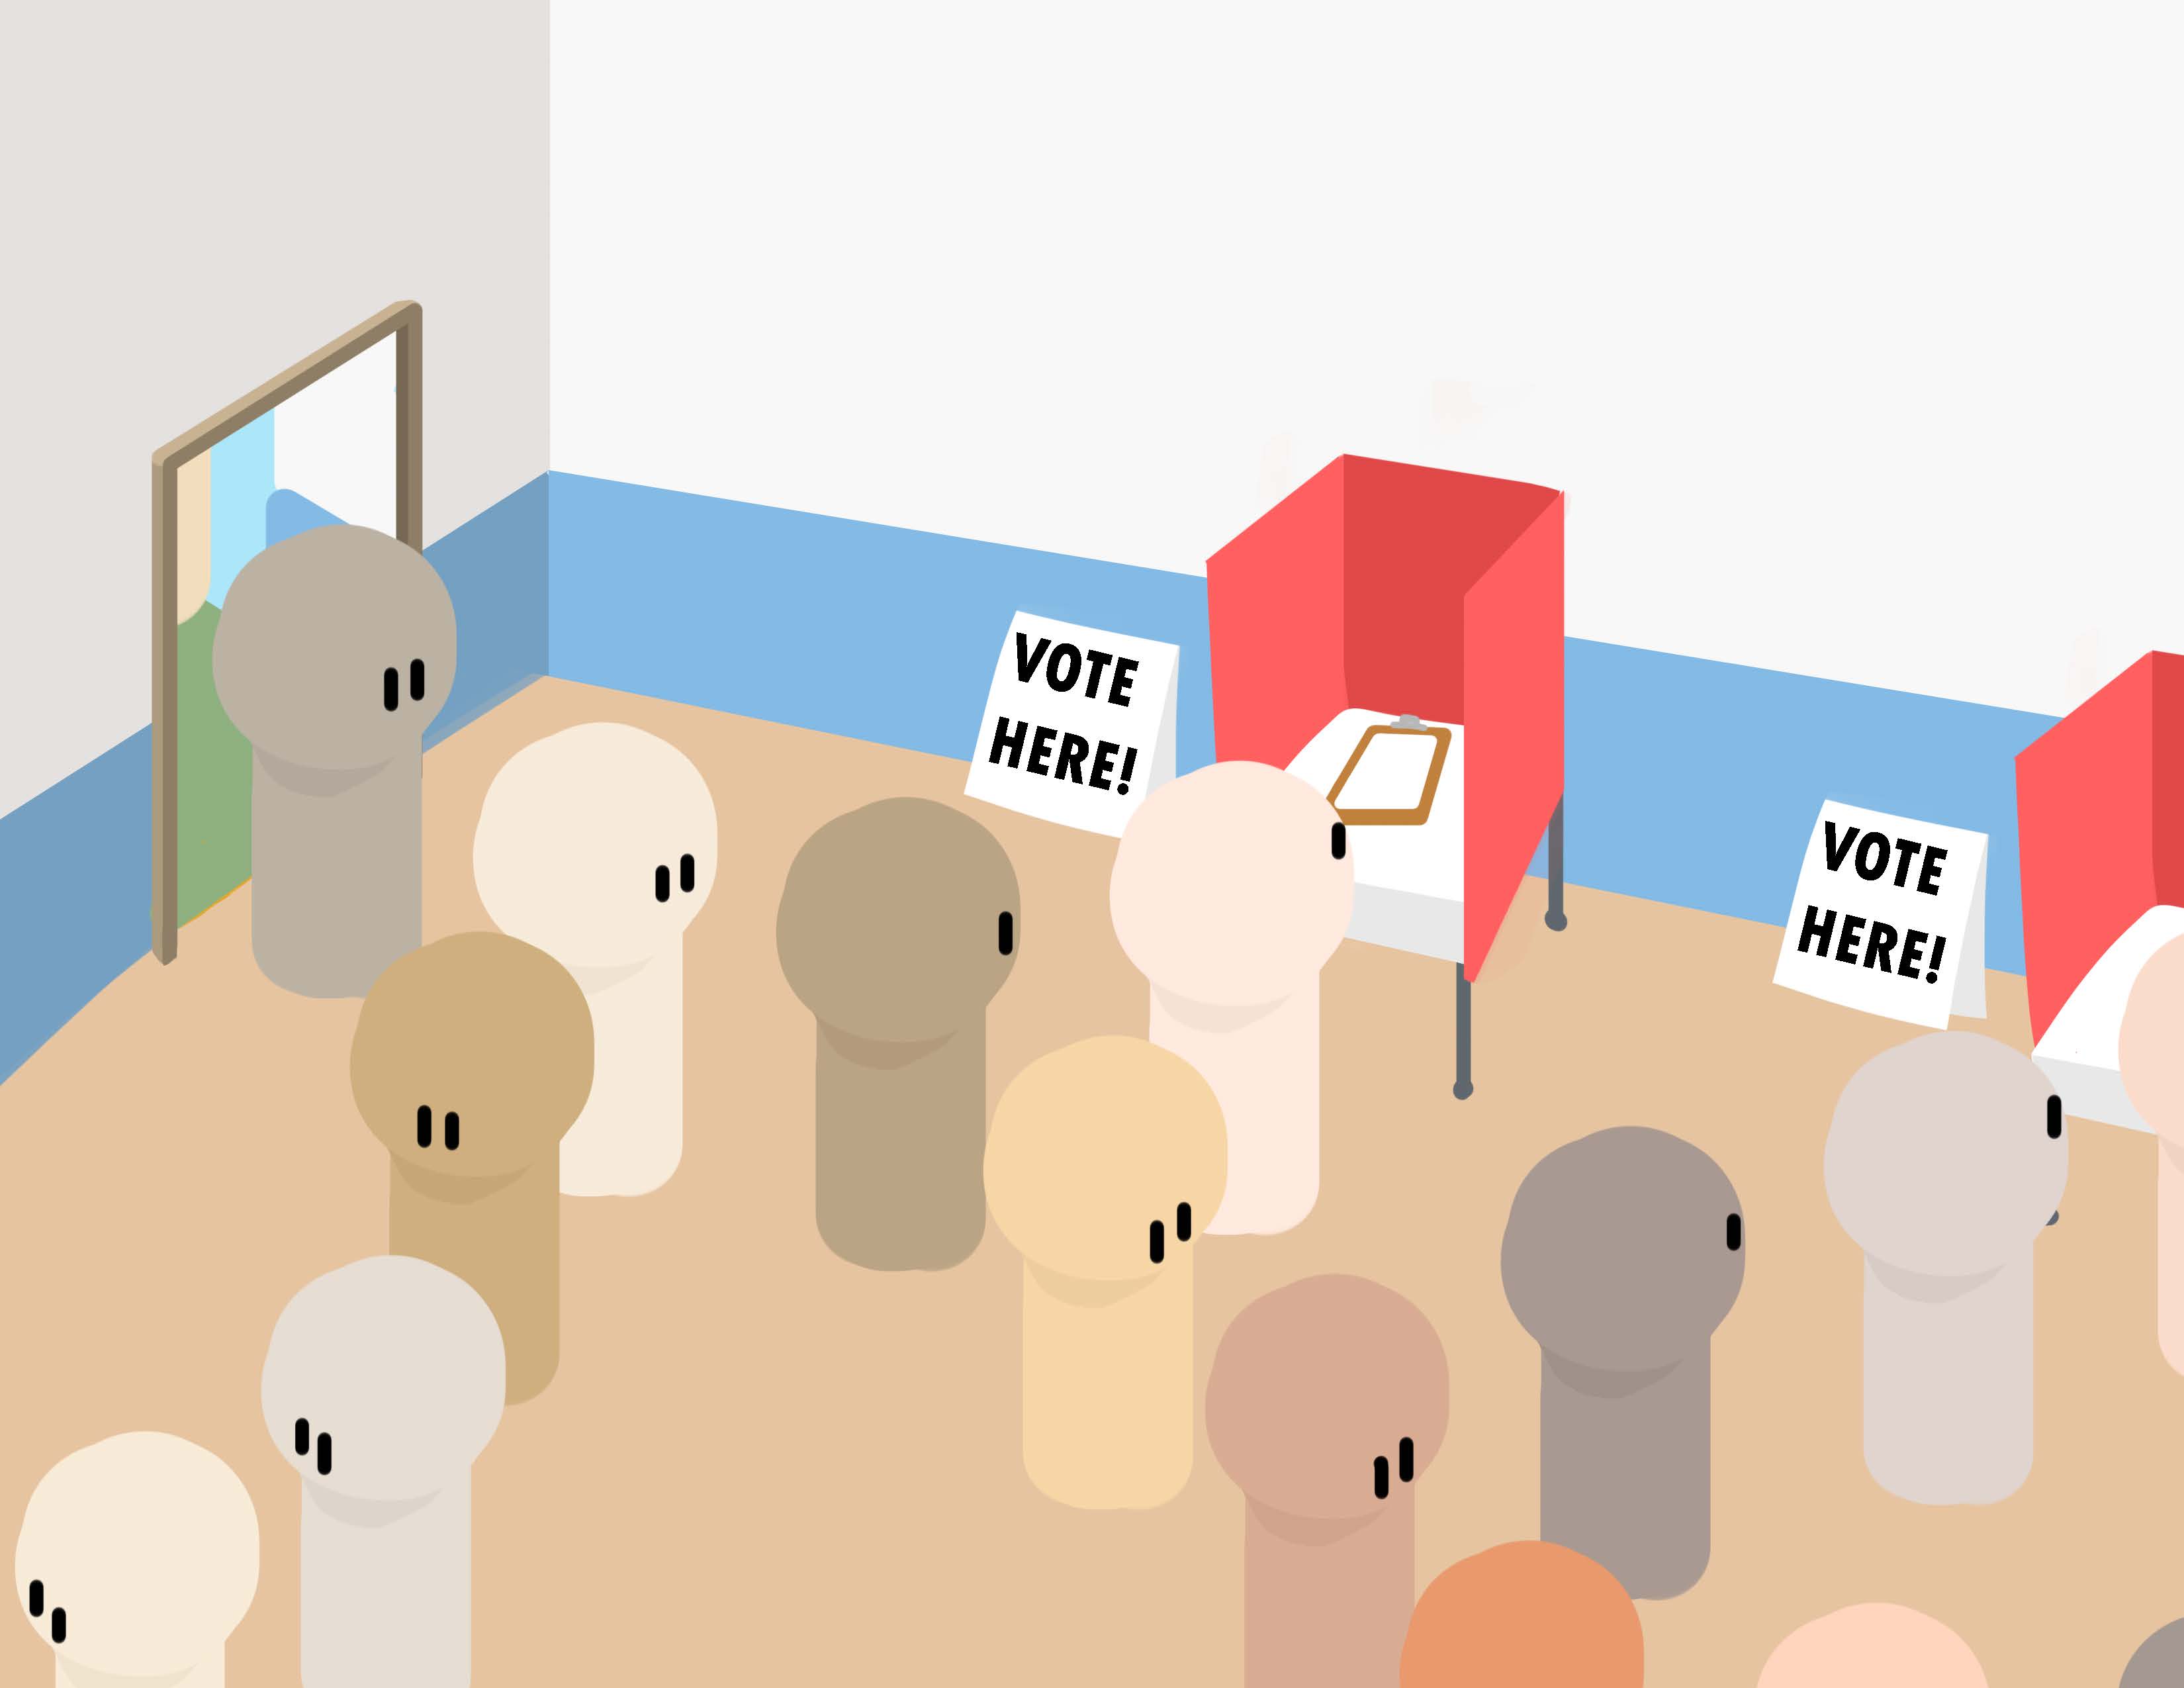 The Voting System Needs to Change